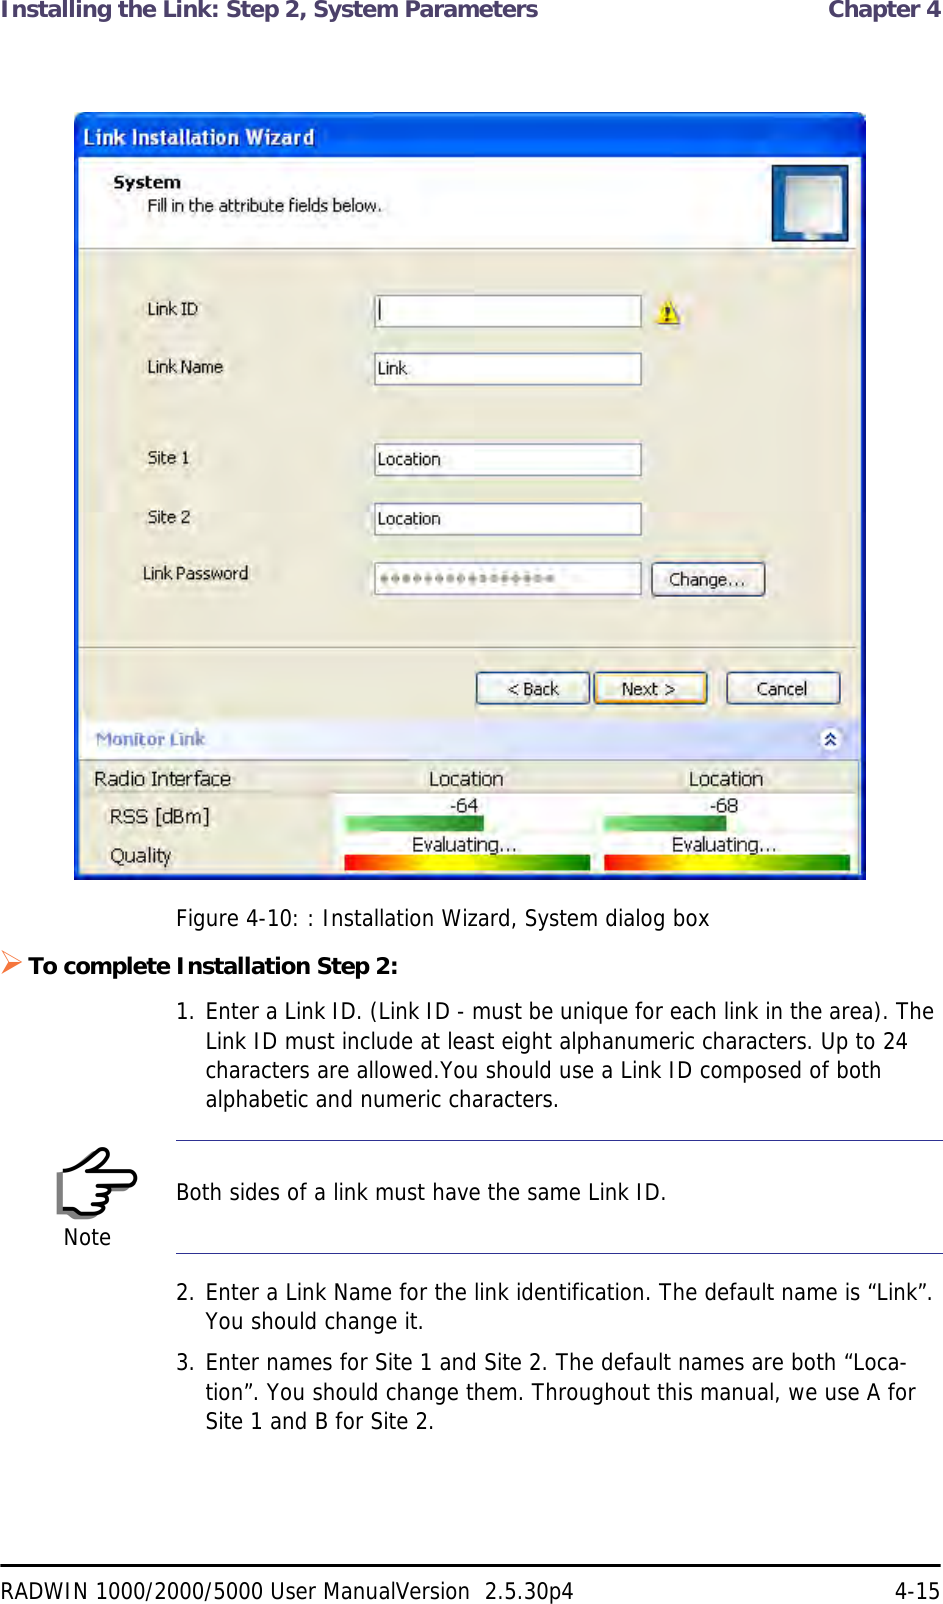 Installing the Link: Step 2, System Parameters  Chapter 4RADWIN 1000/2000/5000 User ManualVersion  2.5.30p4 4-15Figure 4-10: : Installation Wizard, System dialog boxTo complete Installation Step 2:1. Enter a Link ID. (Link ID - must be unique for each link in the area). The Link ID must include at least eight alphanumeric characters. Up to 24 characters are allowed.You should use a Link ID composed of both alphabetic and numeric characters.2. Enter a Link Name for the link identification. The default name is “Link”. You should change it.3. Enter names for Site 1 and Site 2. The default names are both “Loca-tion”. You should change them. Throughout this manual, we use A for Site 1 and B for Site 2.NoteBoth sides of a link must have the same Link ID.